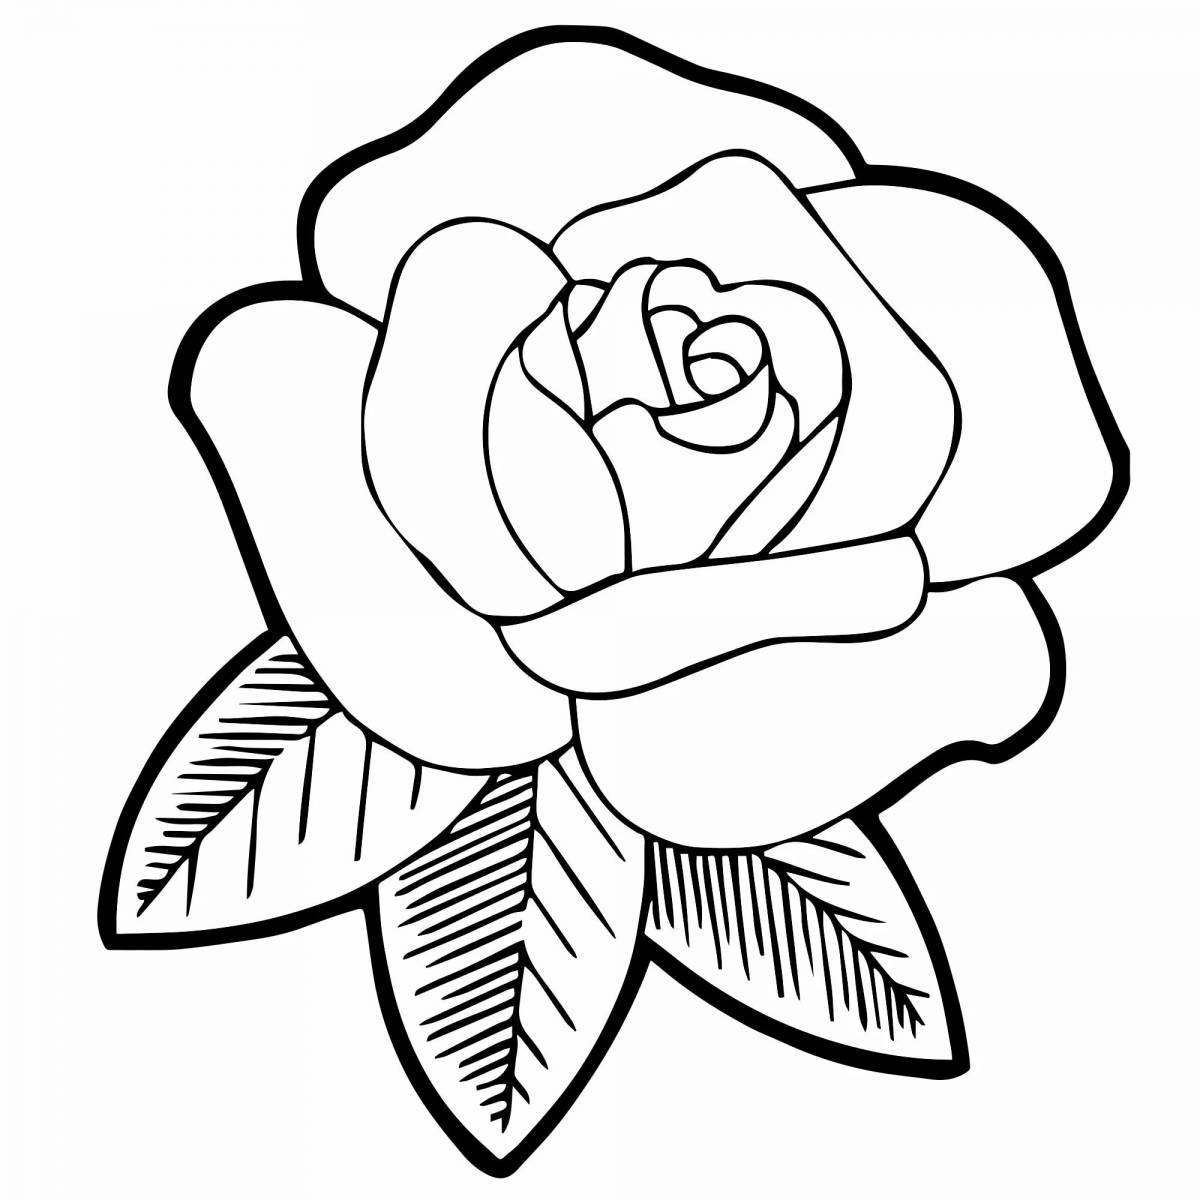 Jolly rose coloring book for girls